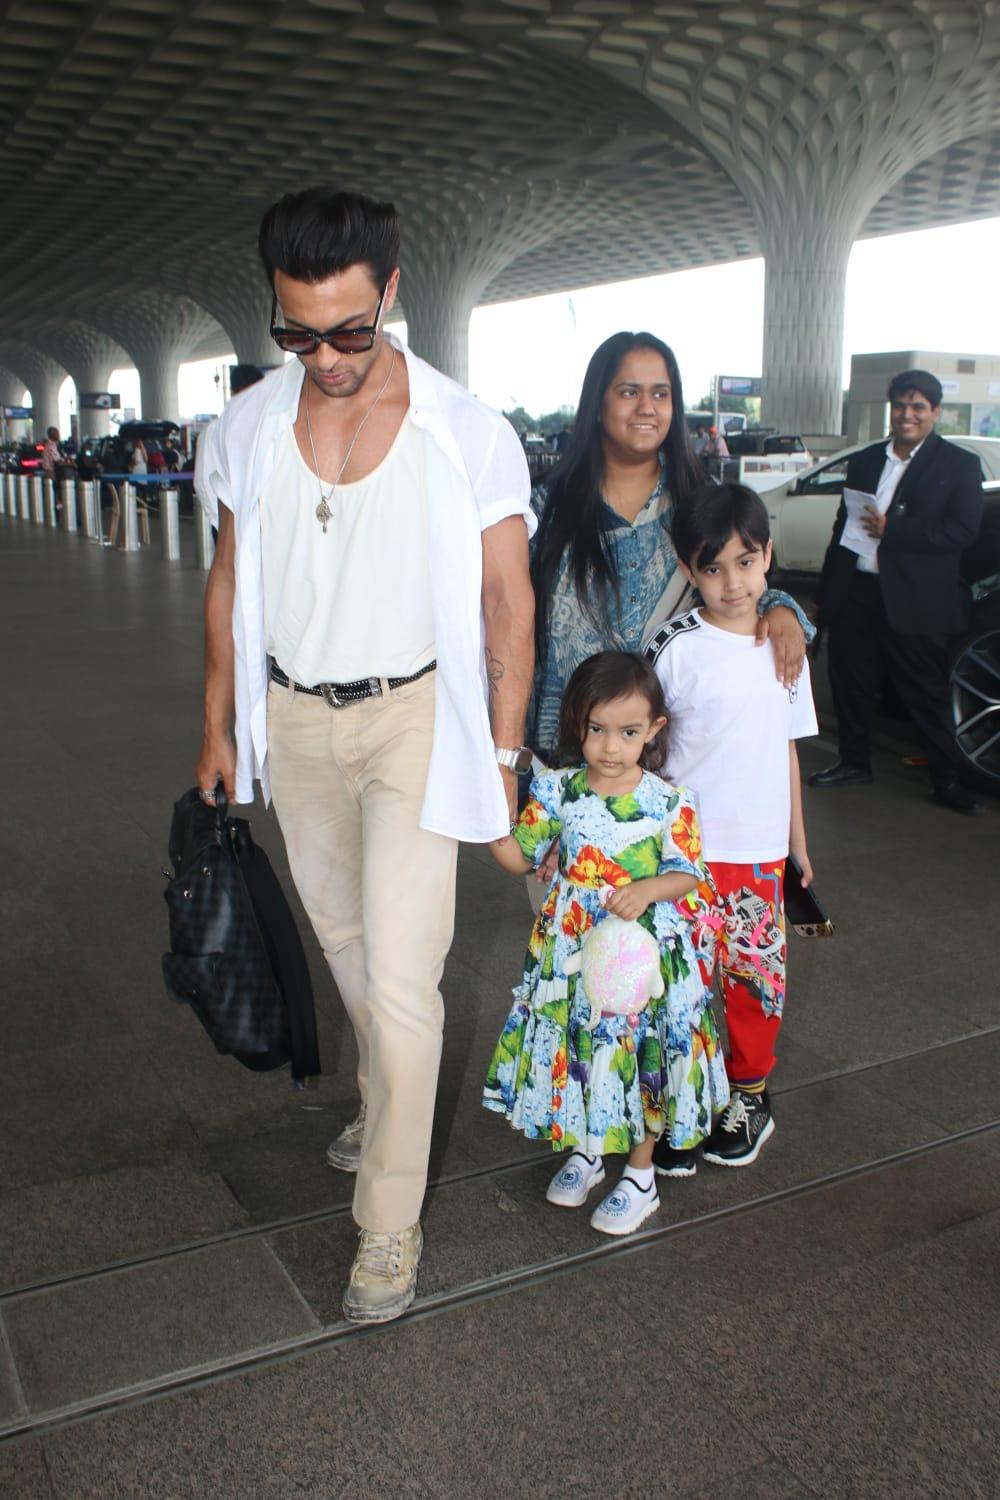 Ayush Sharma and Arpita Singh along with their adorable children were spotted at the airport